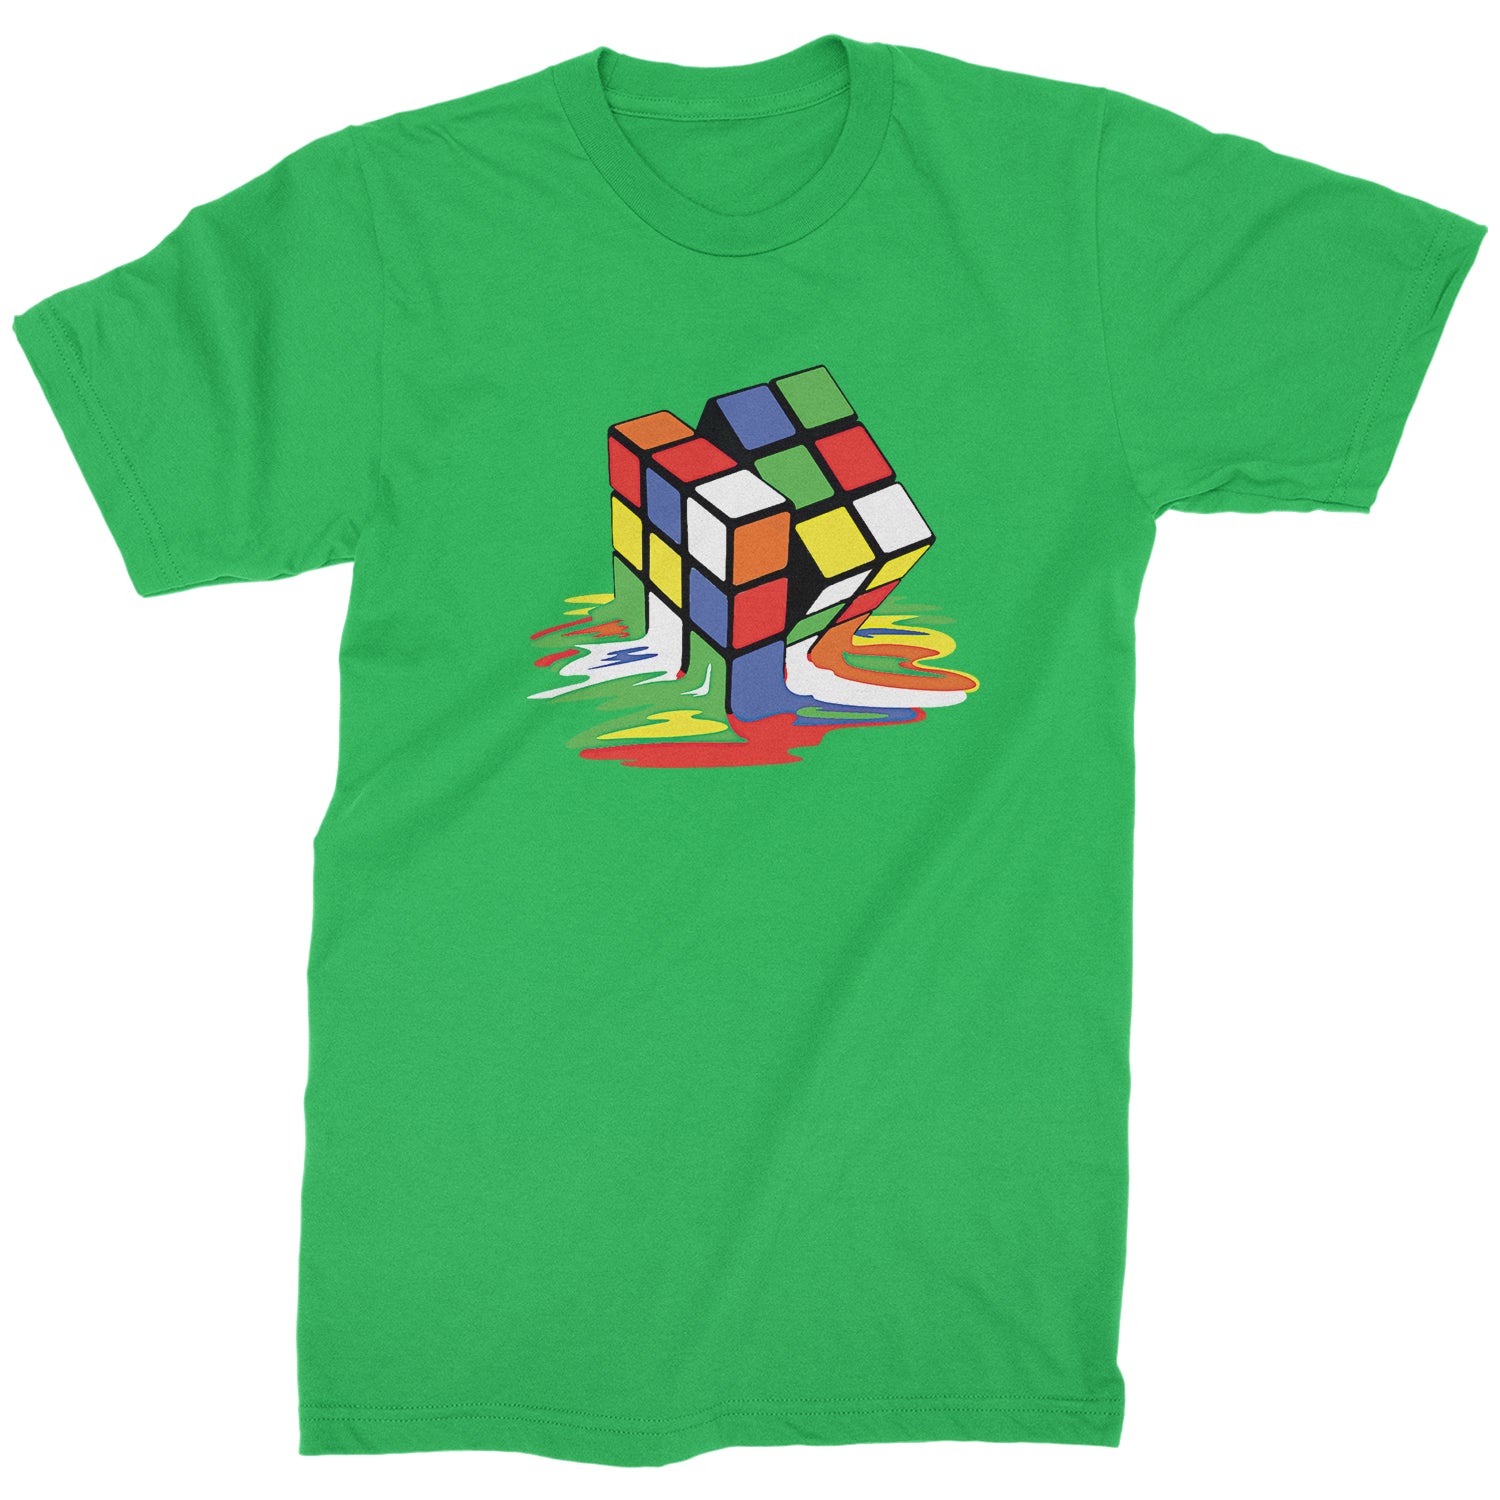 Melting Multi-Colored Cube Mens T-shirt gamer, gaming, nerd, shirt by Expression Tees